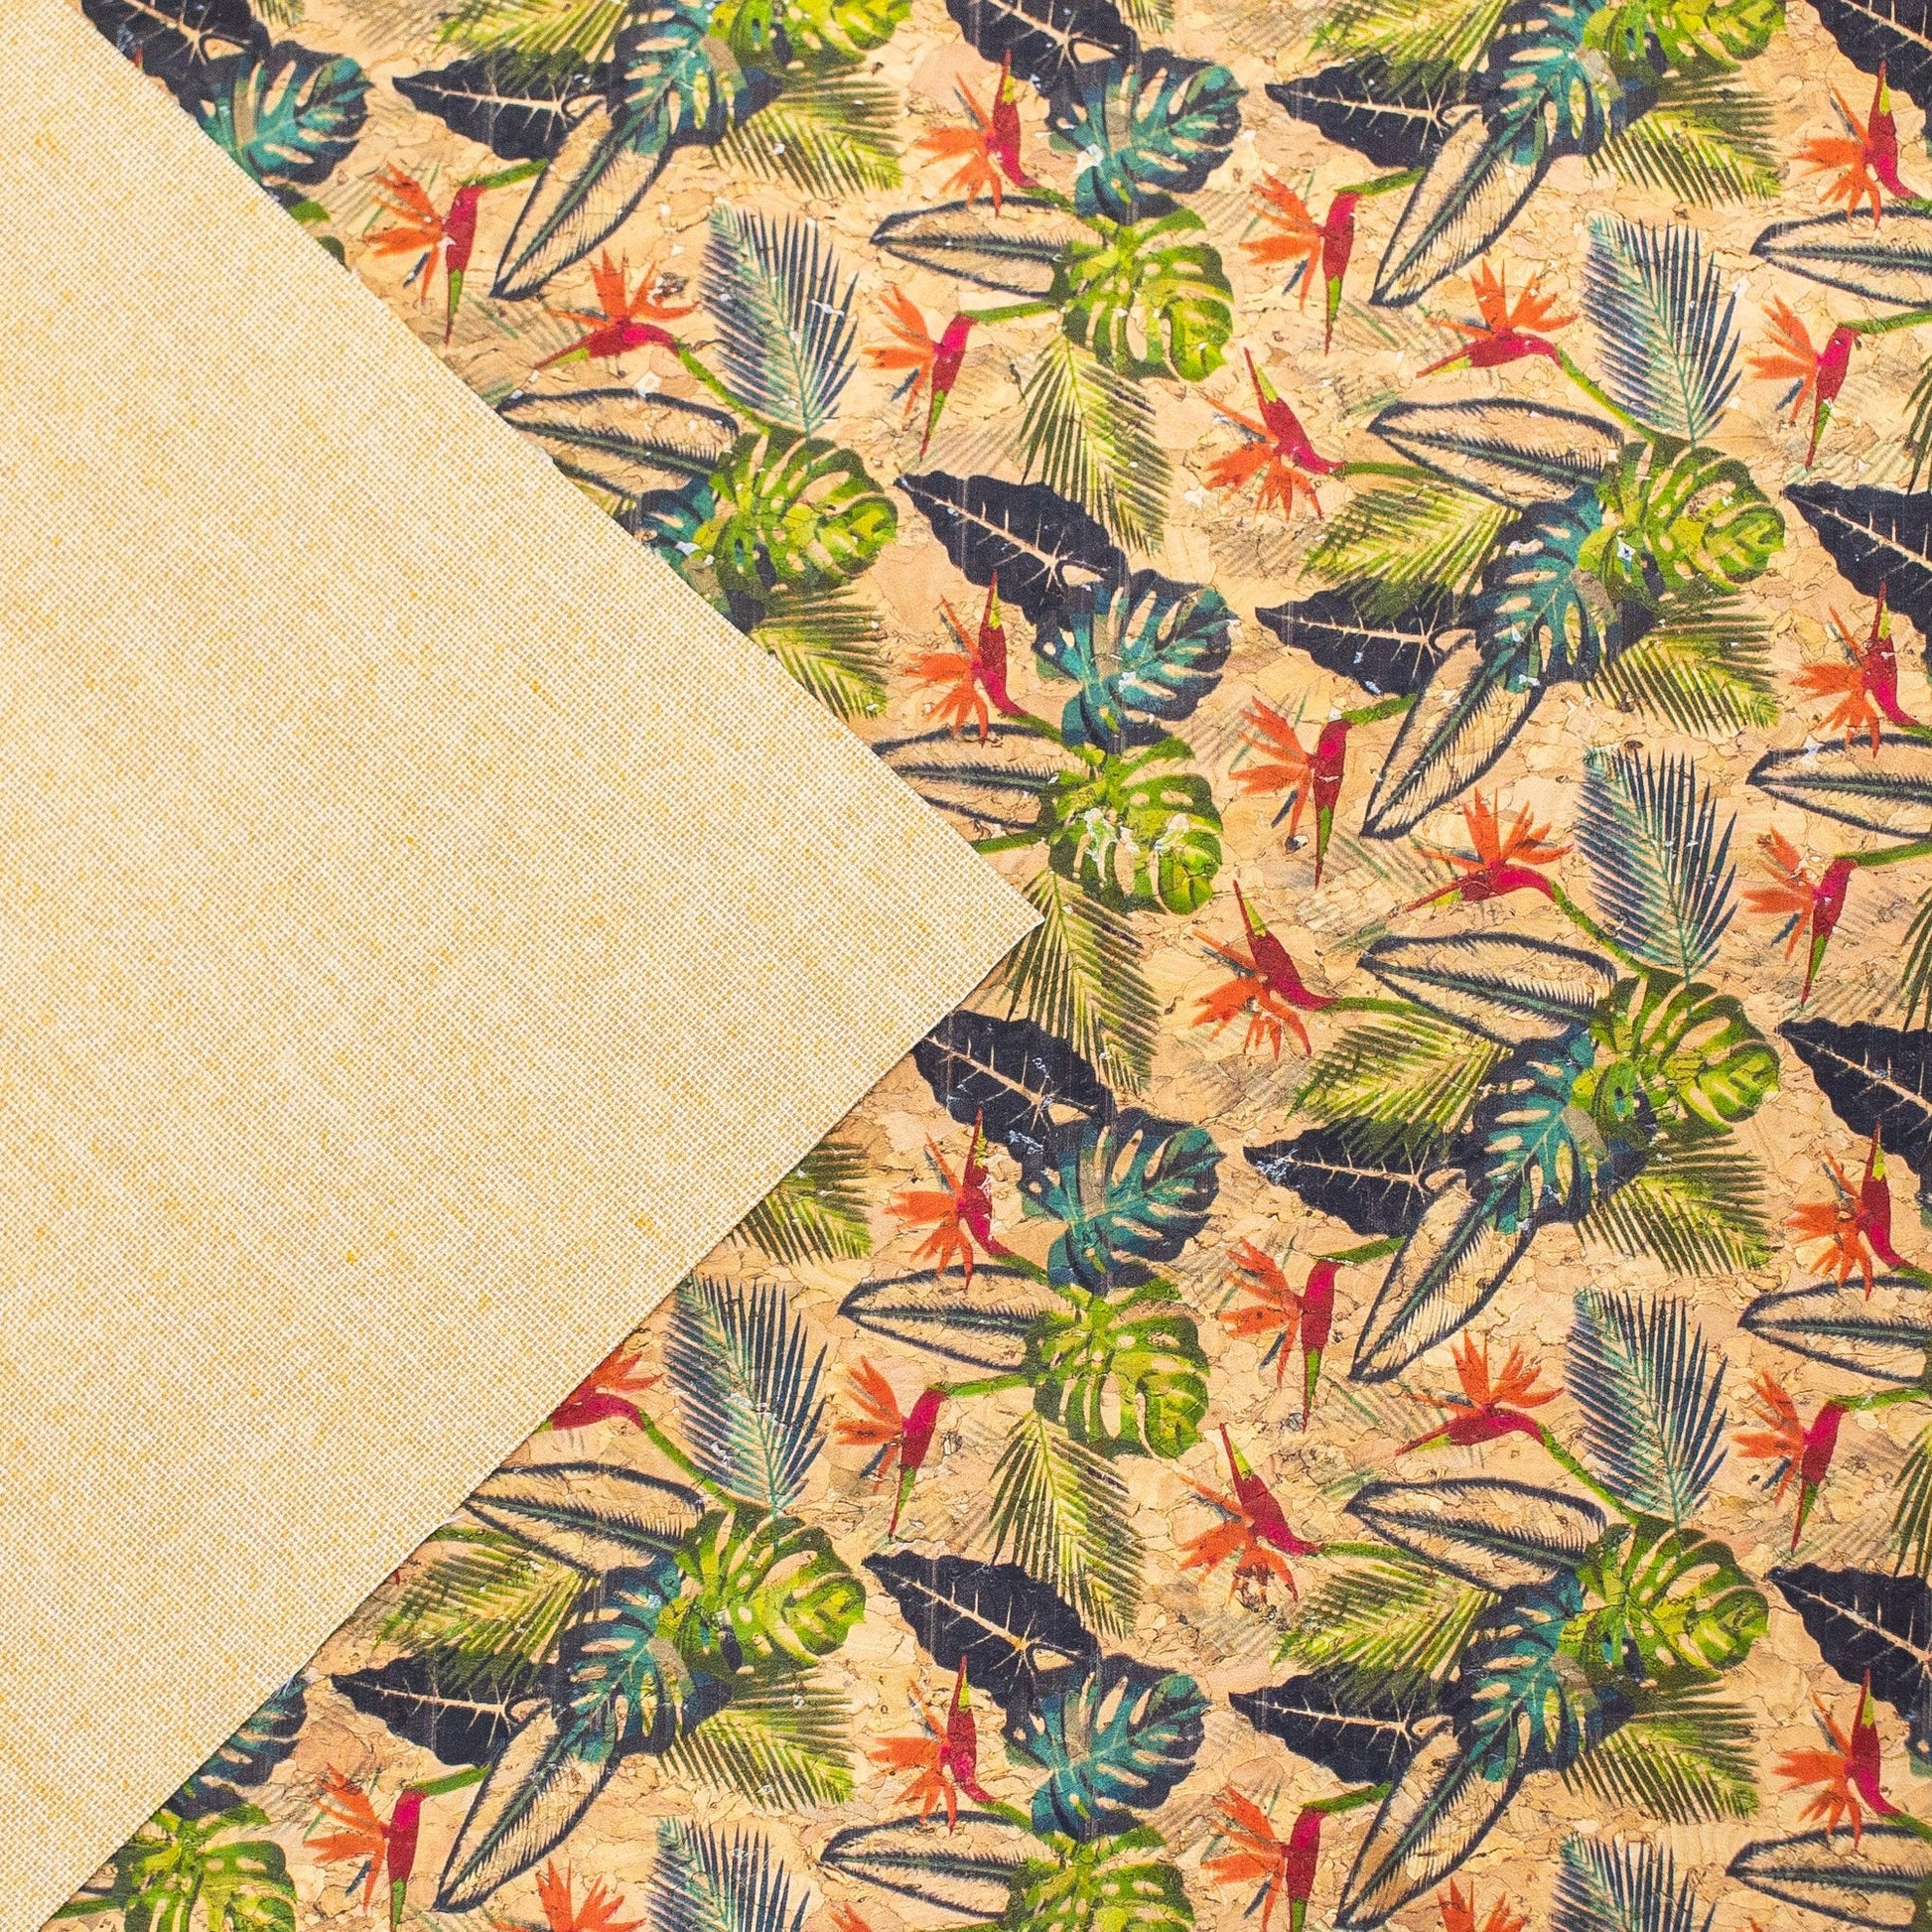 Exotic Leaves Vegan Cork Fabric | THE CORK COLLECTION